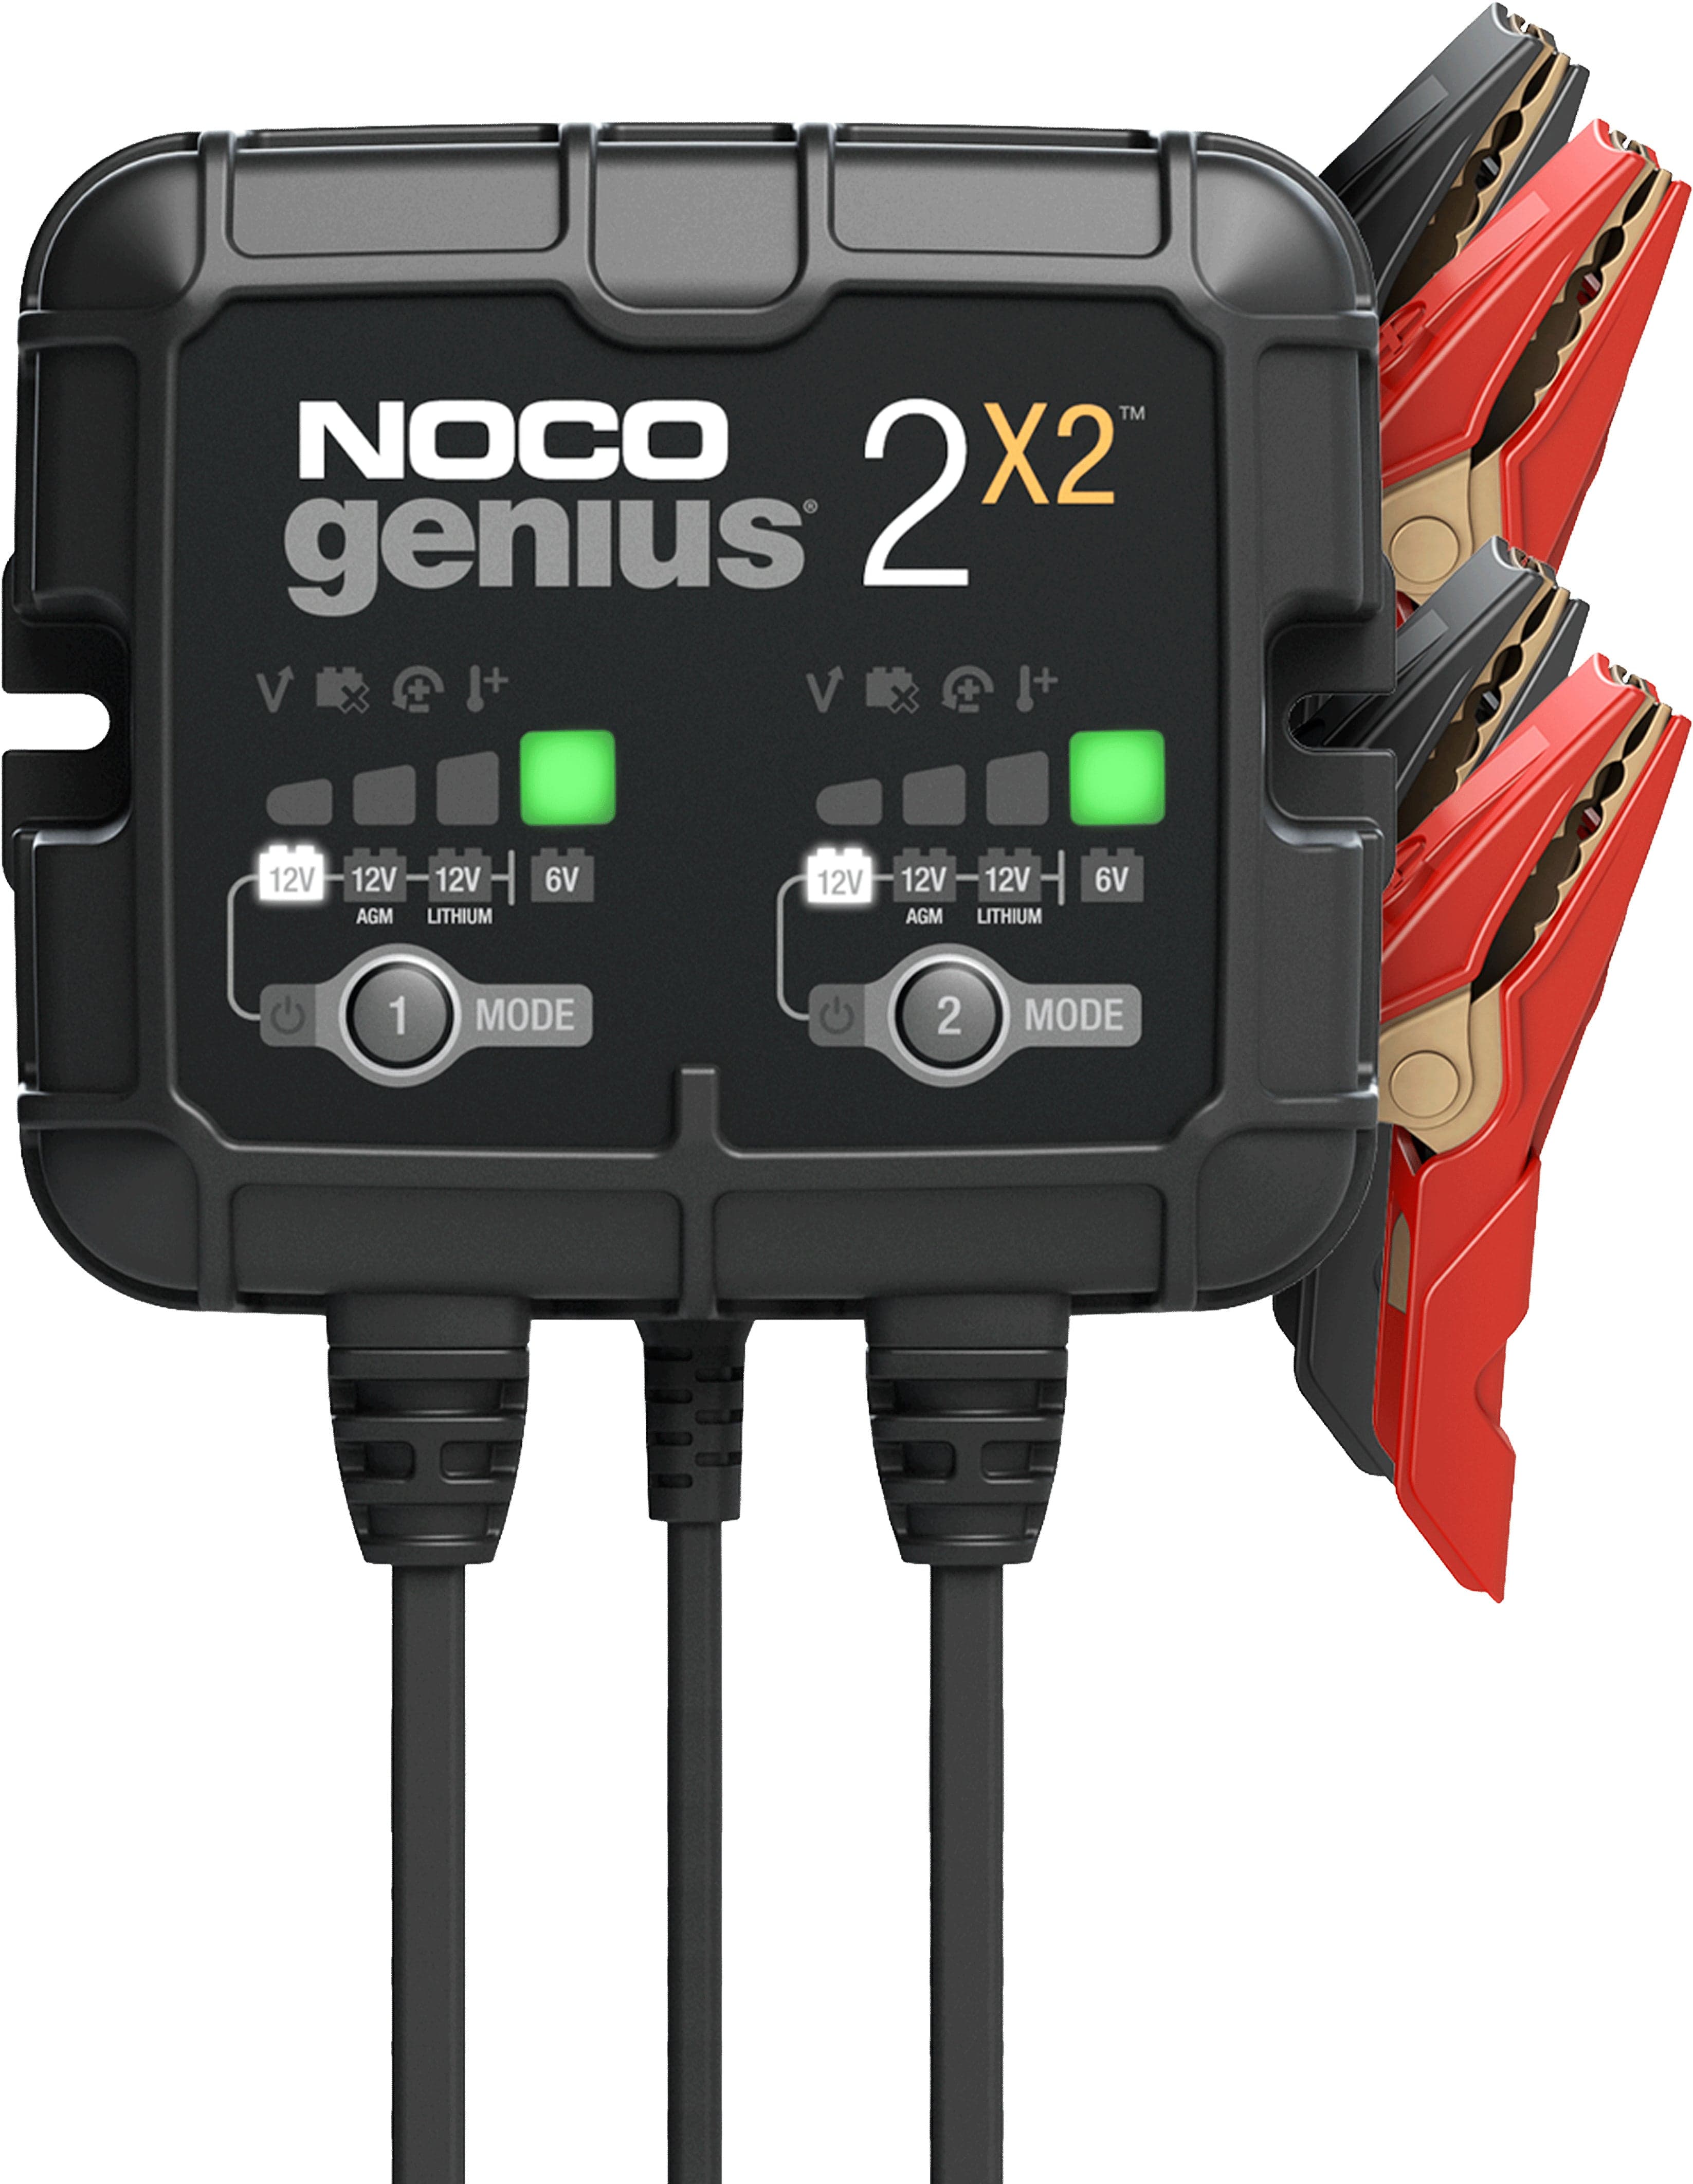 Western Powersports Battery Charger 2 Bank 2X2 Charger by Noco Genius GENIUS2X2